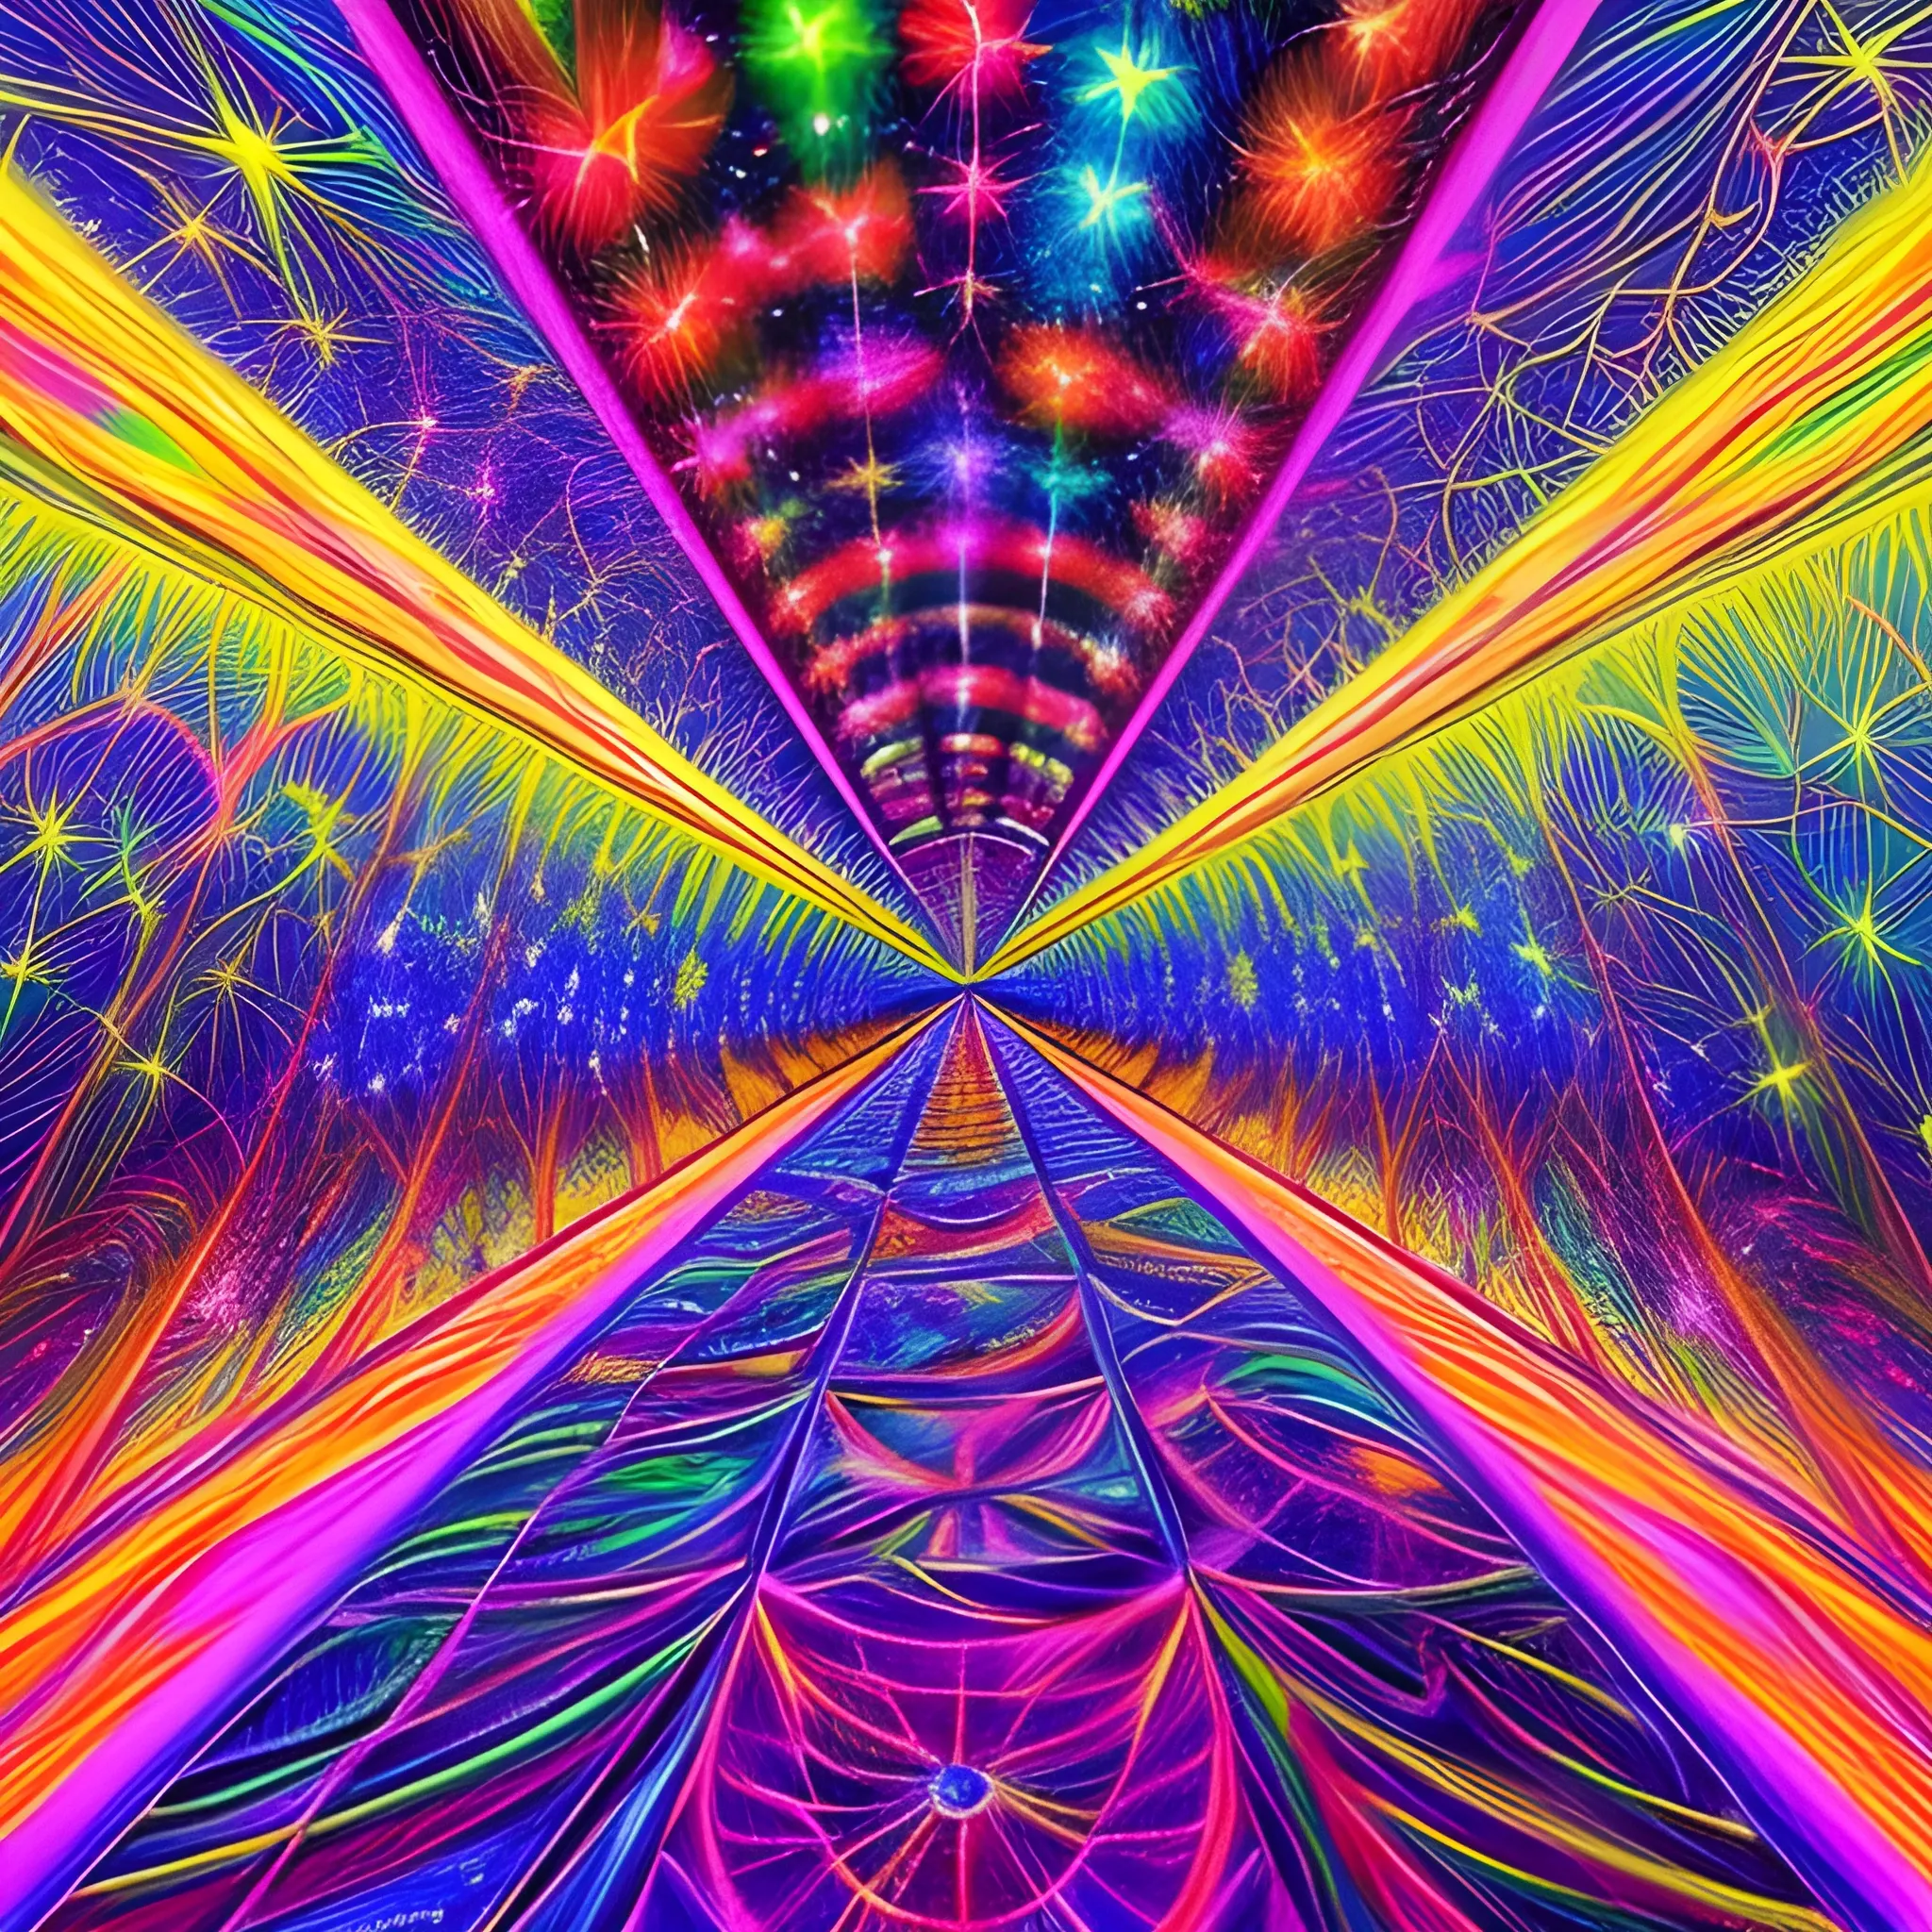 interior vision of a tunnel, very colorful psychedelic stroboscopic, spinning on itself shooting towards the starry sky in the background, Trippy, Pencil Sketch